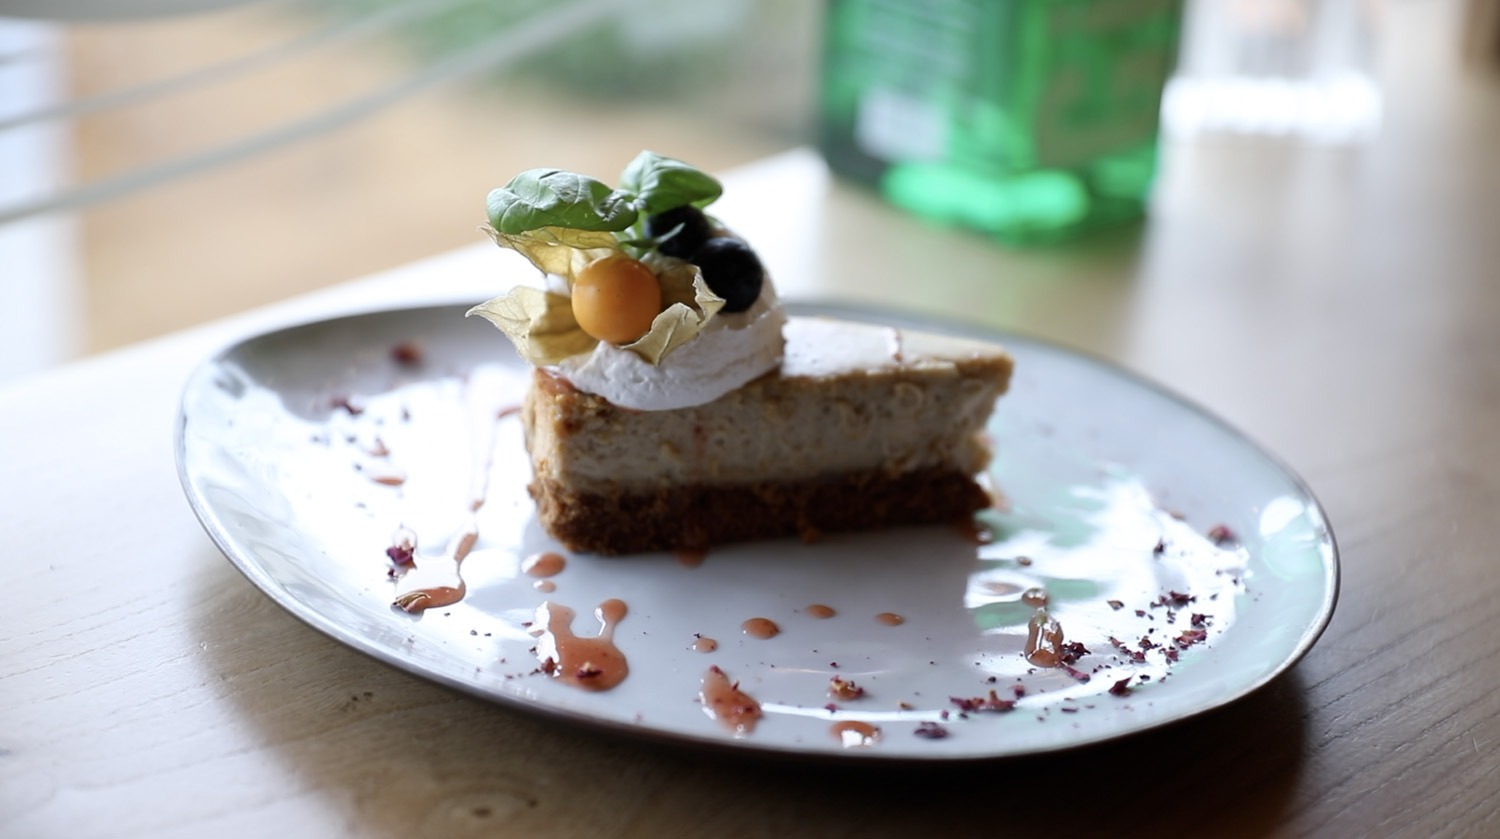 This cheesecake with a nut base is decorated with vegan cream, basil and berries.